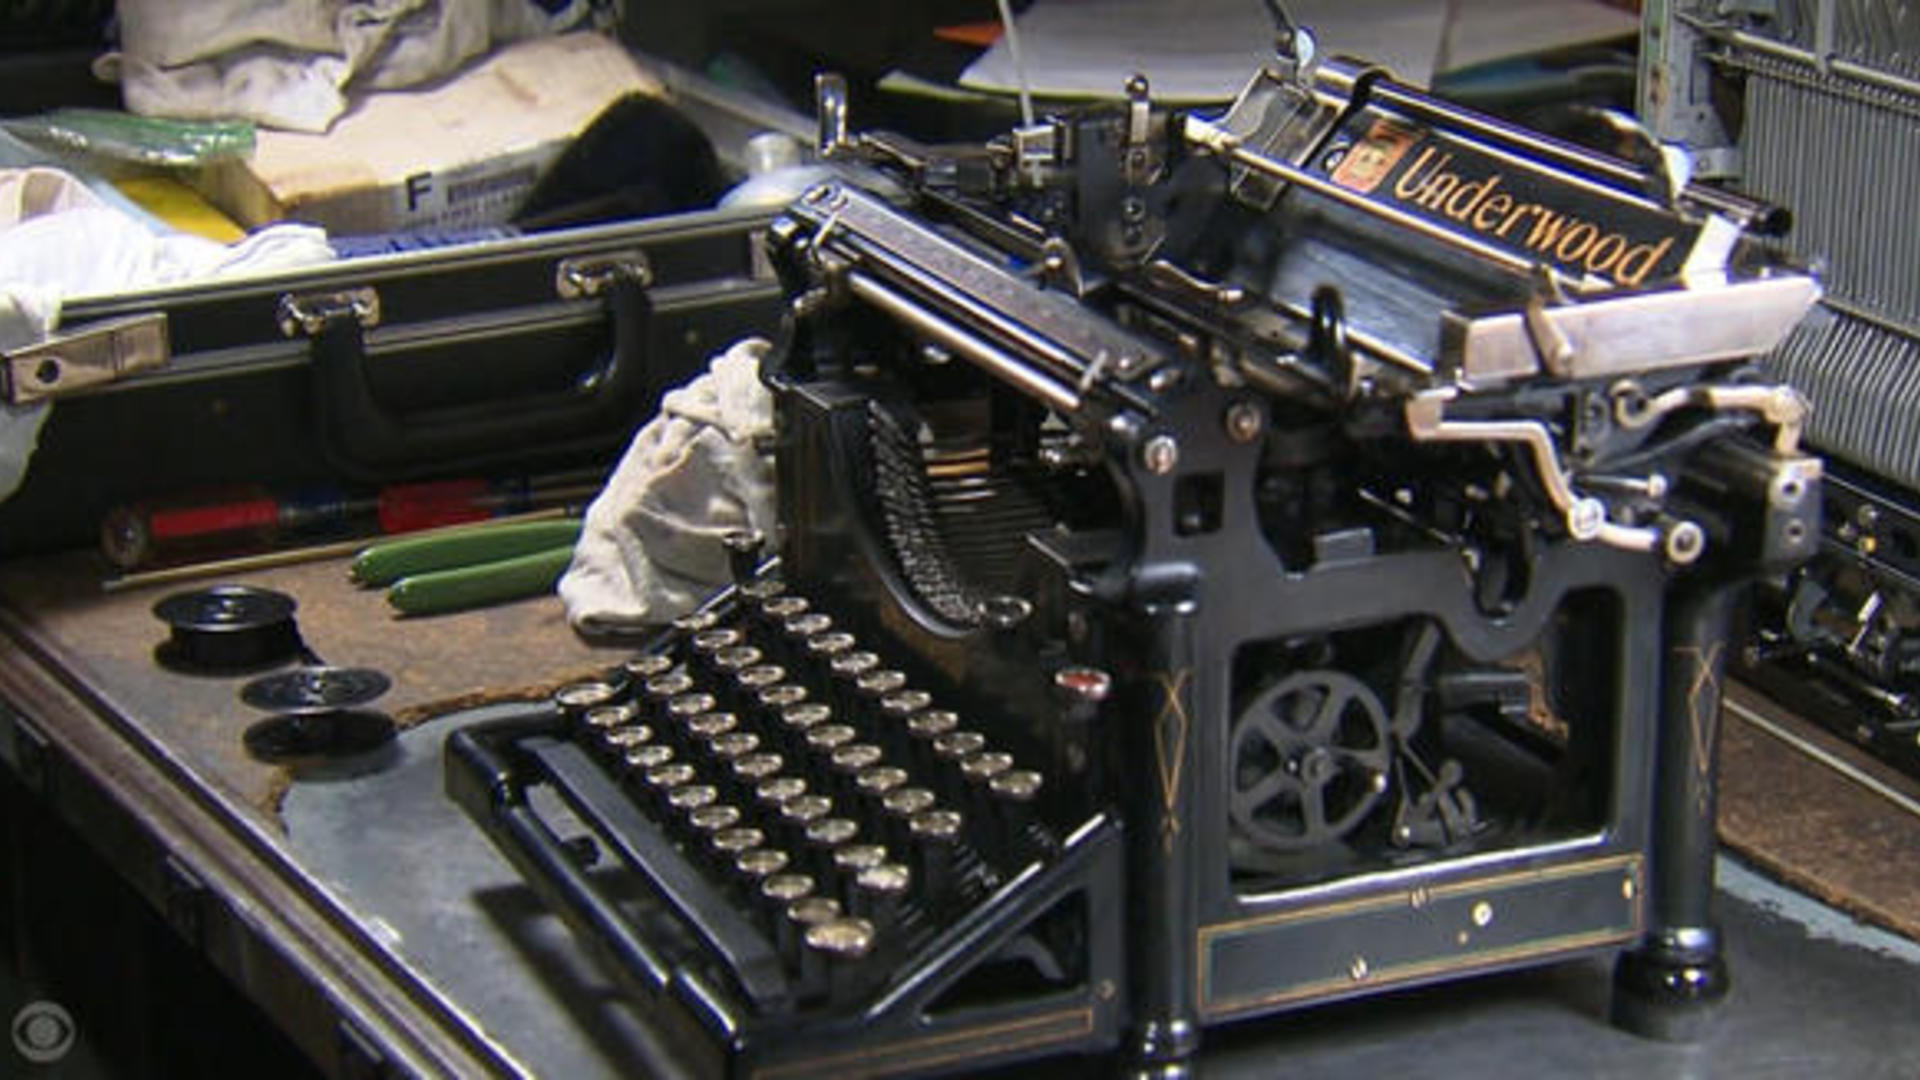 Typewriters for sale in Pittsburgh, Pennsylvania